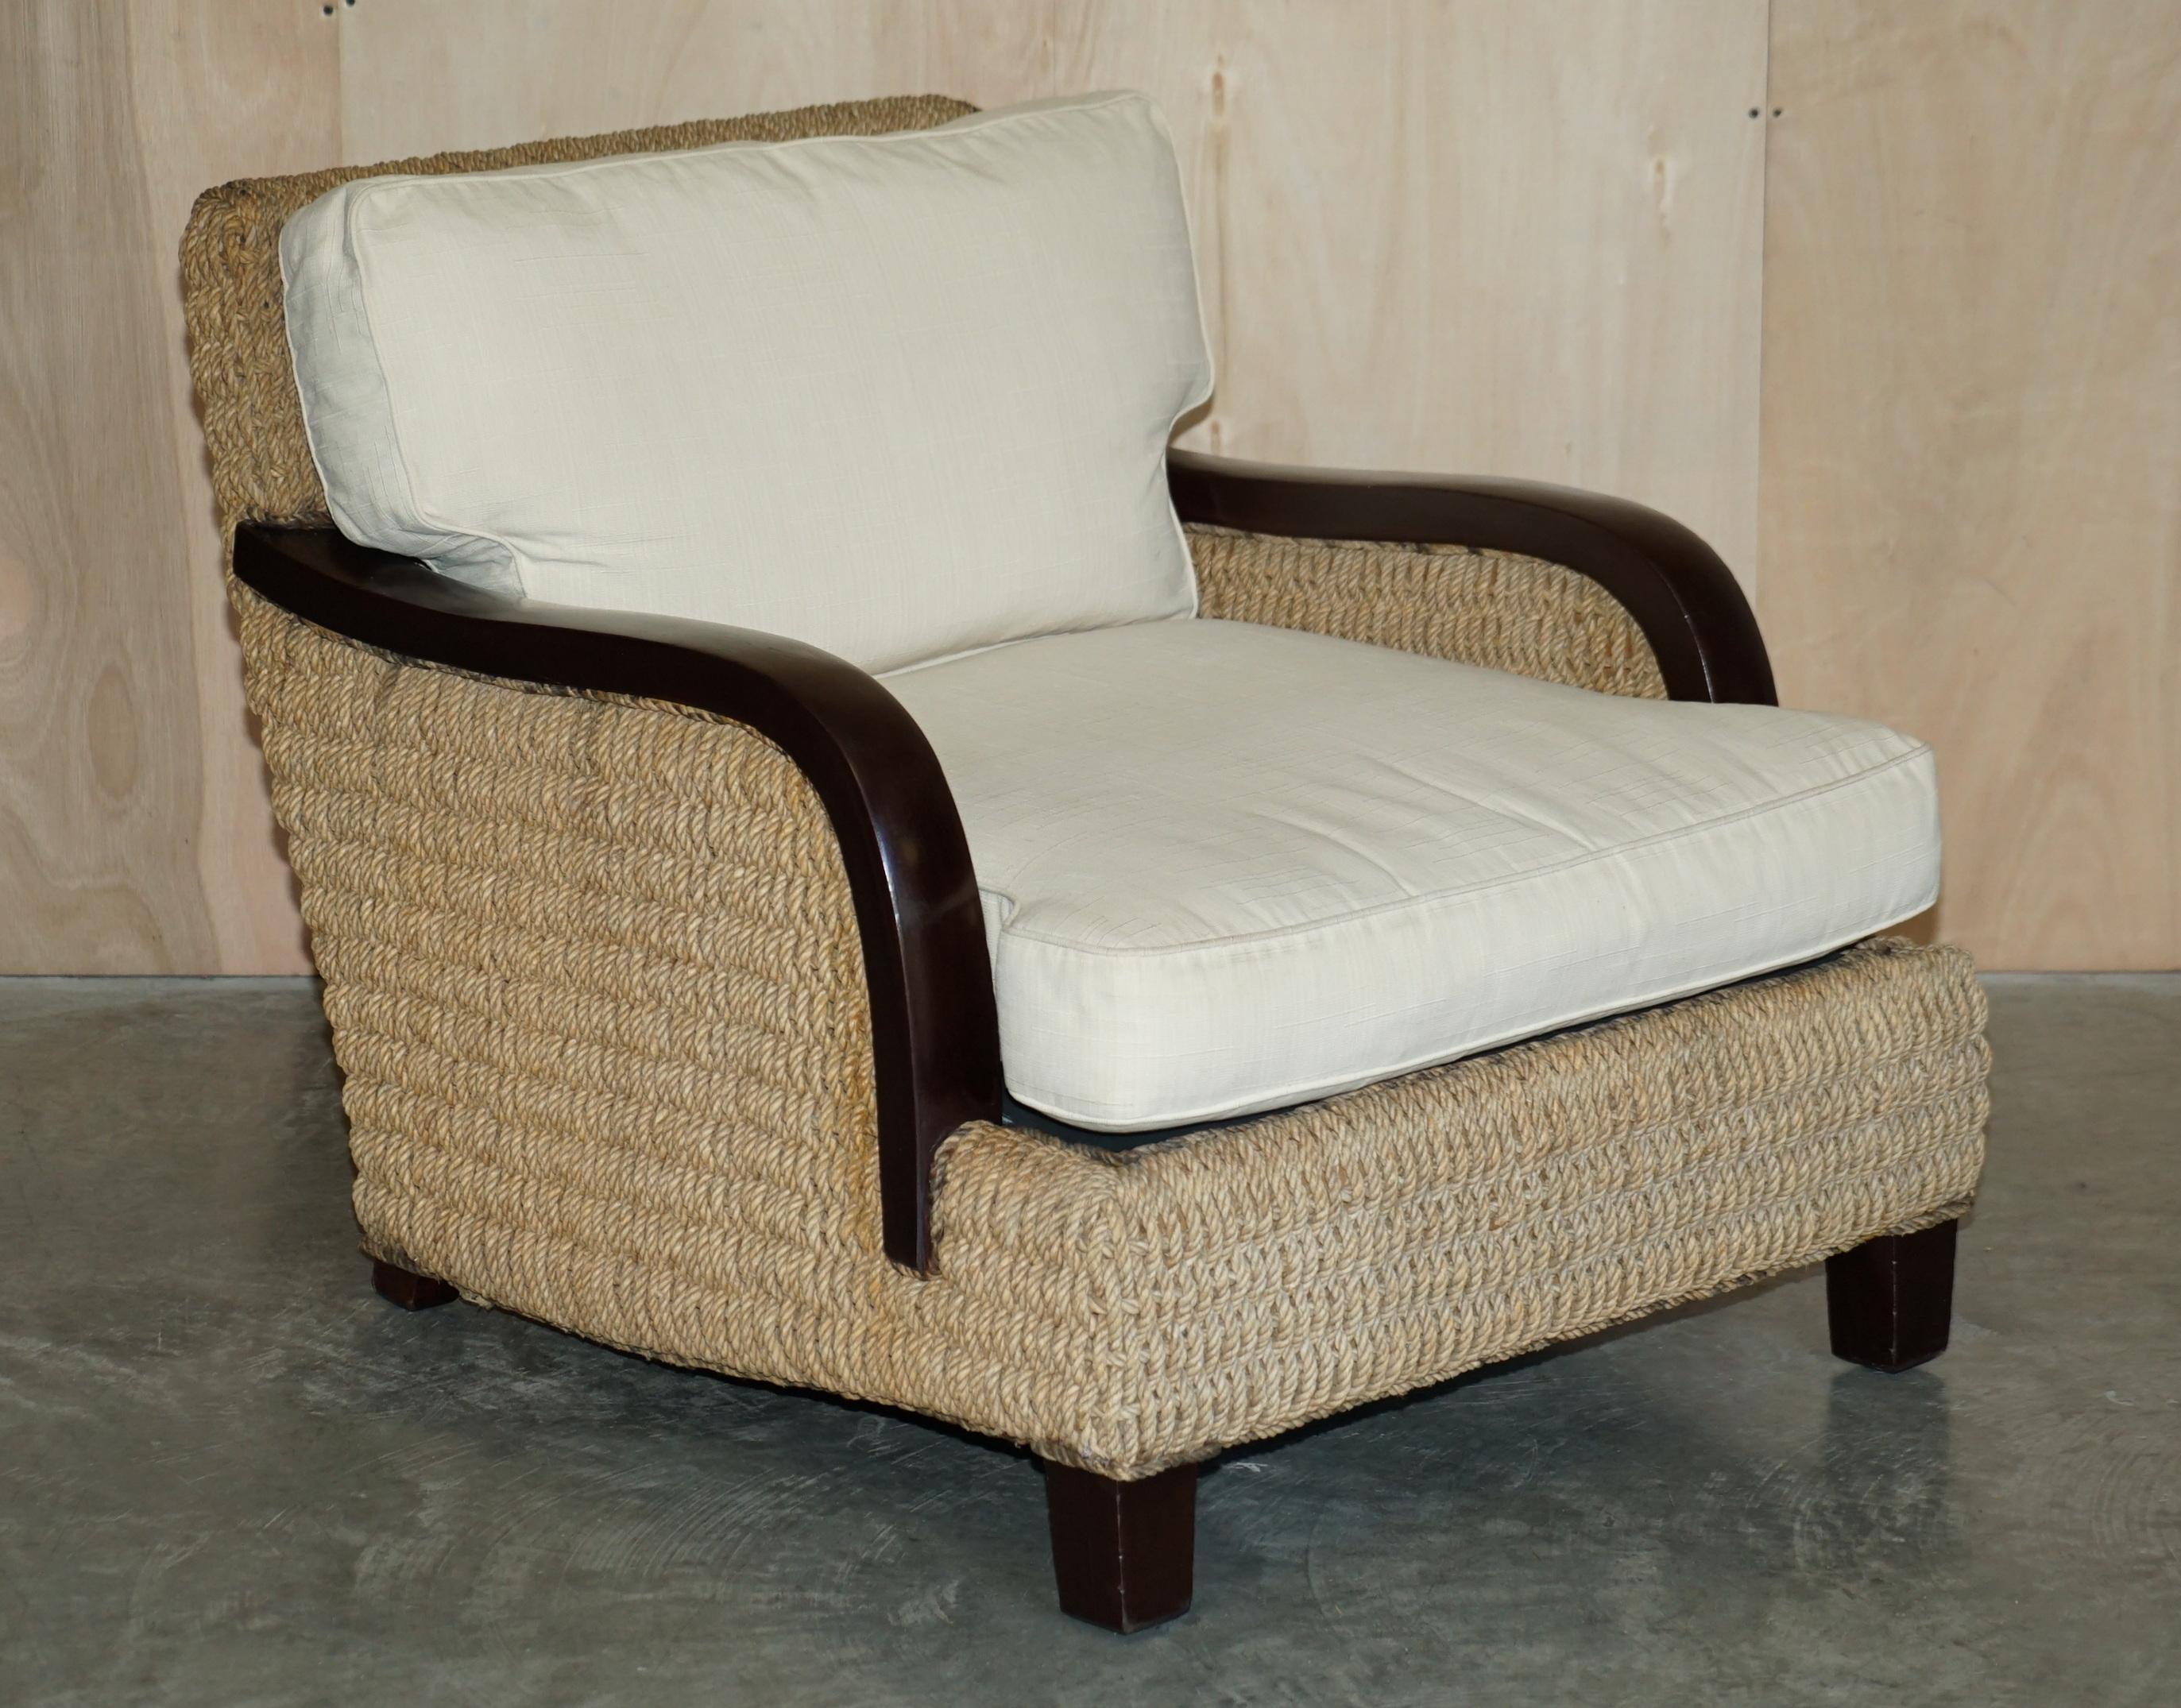 We are delighted to offer for sale this pair of absolutely stunning Ralph Lauren oversized Barrymore armchairs with heavy wicker frames RRP £11,000.

A truly stunning pair, absolutely the most comfortable lounge chairs I have sat in this year,